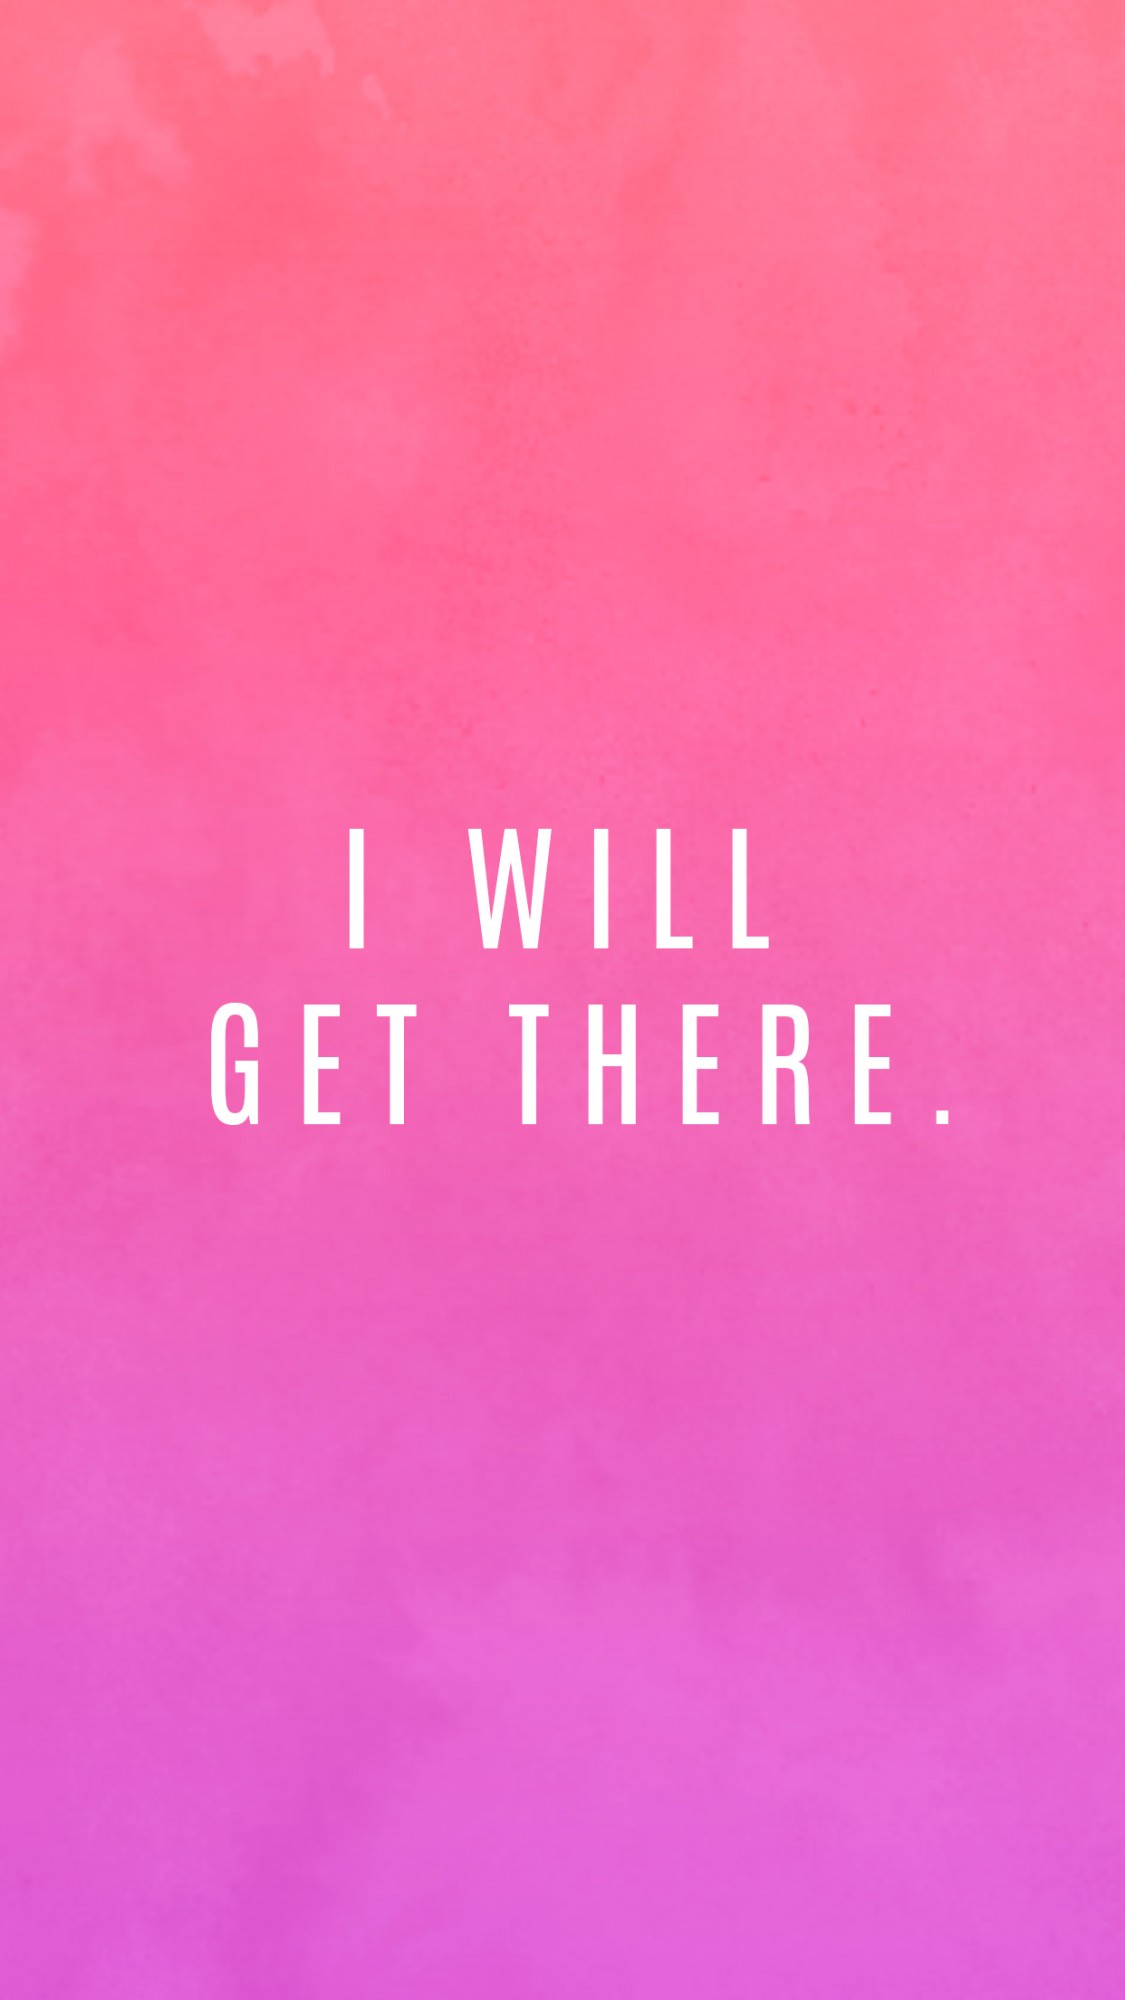 Will Get There Quote - HD Wallpaper 